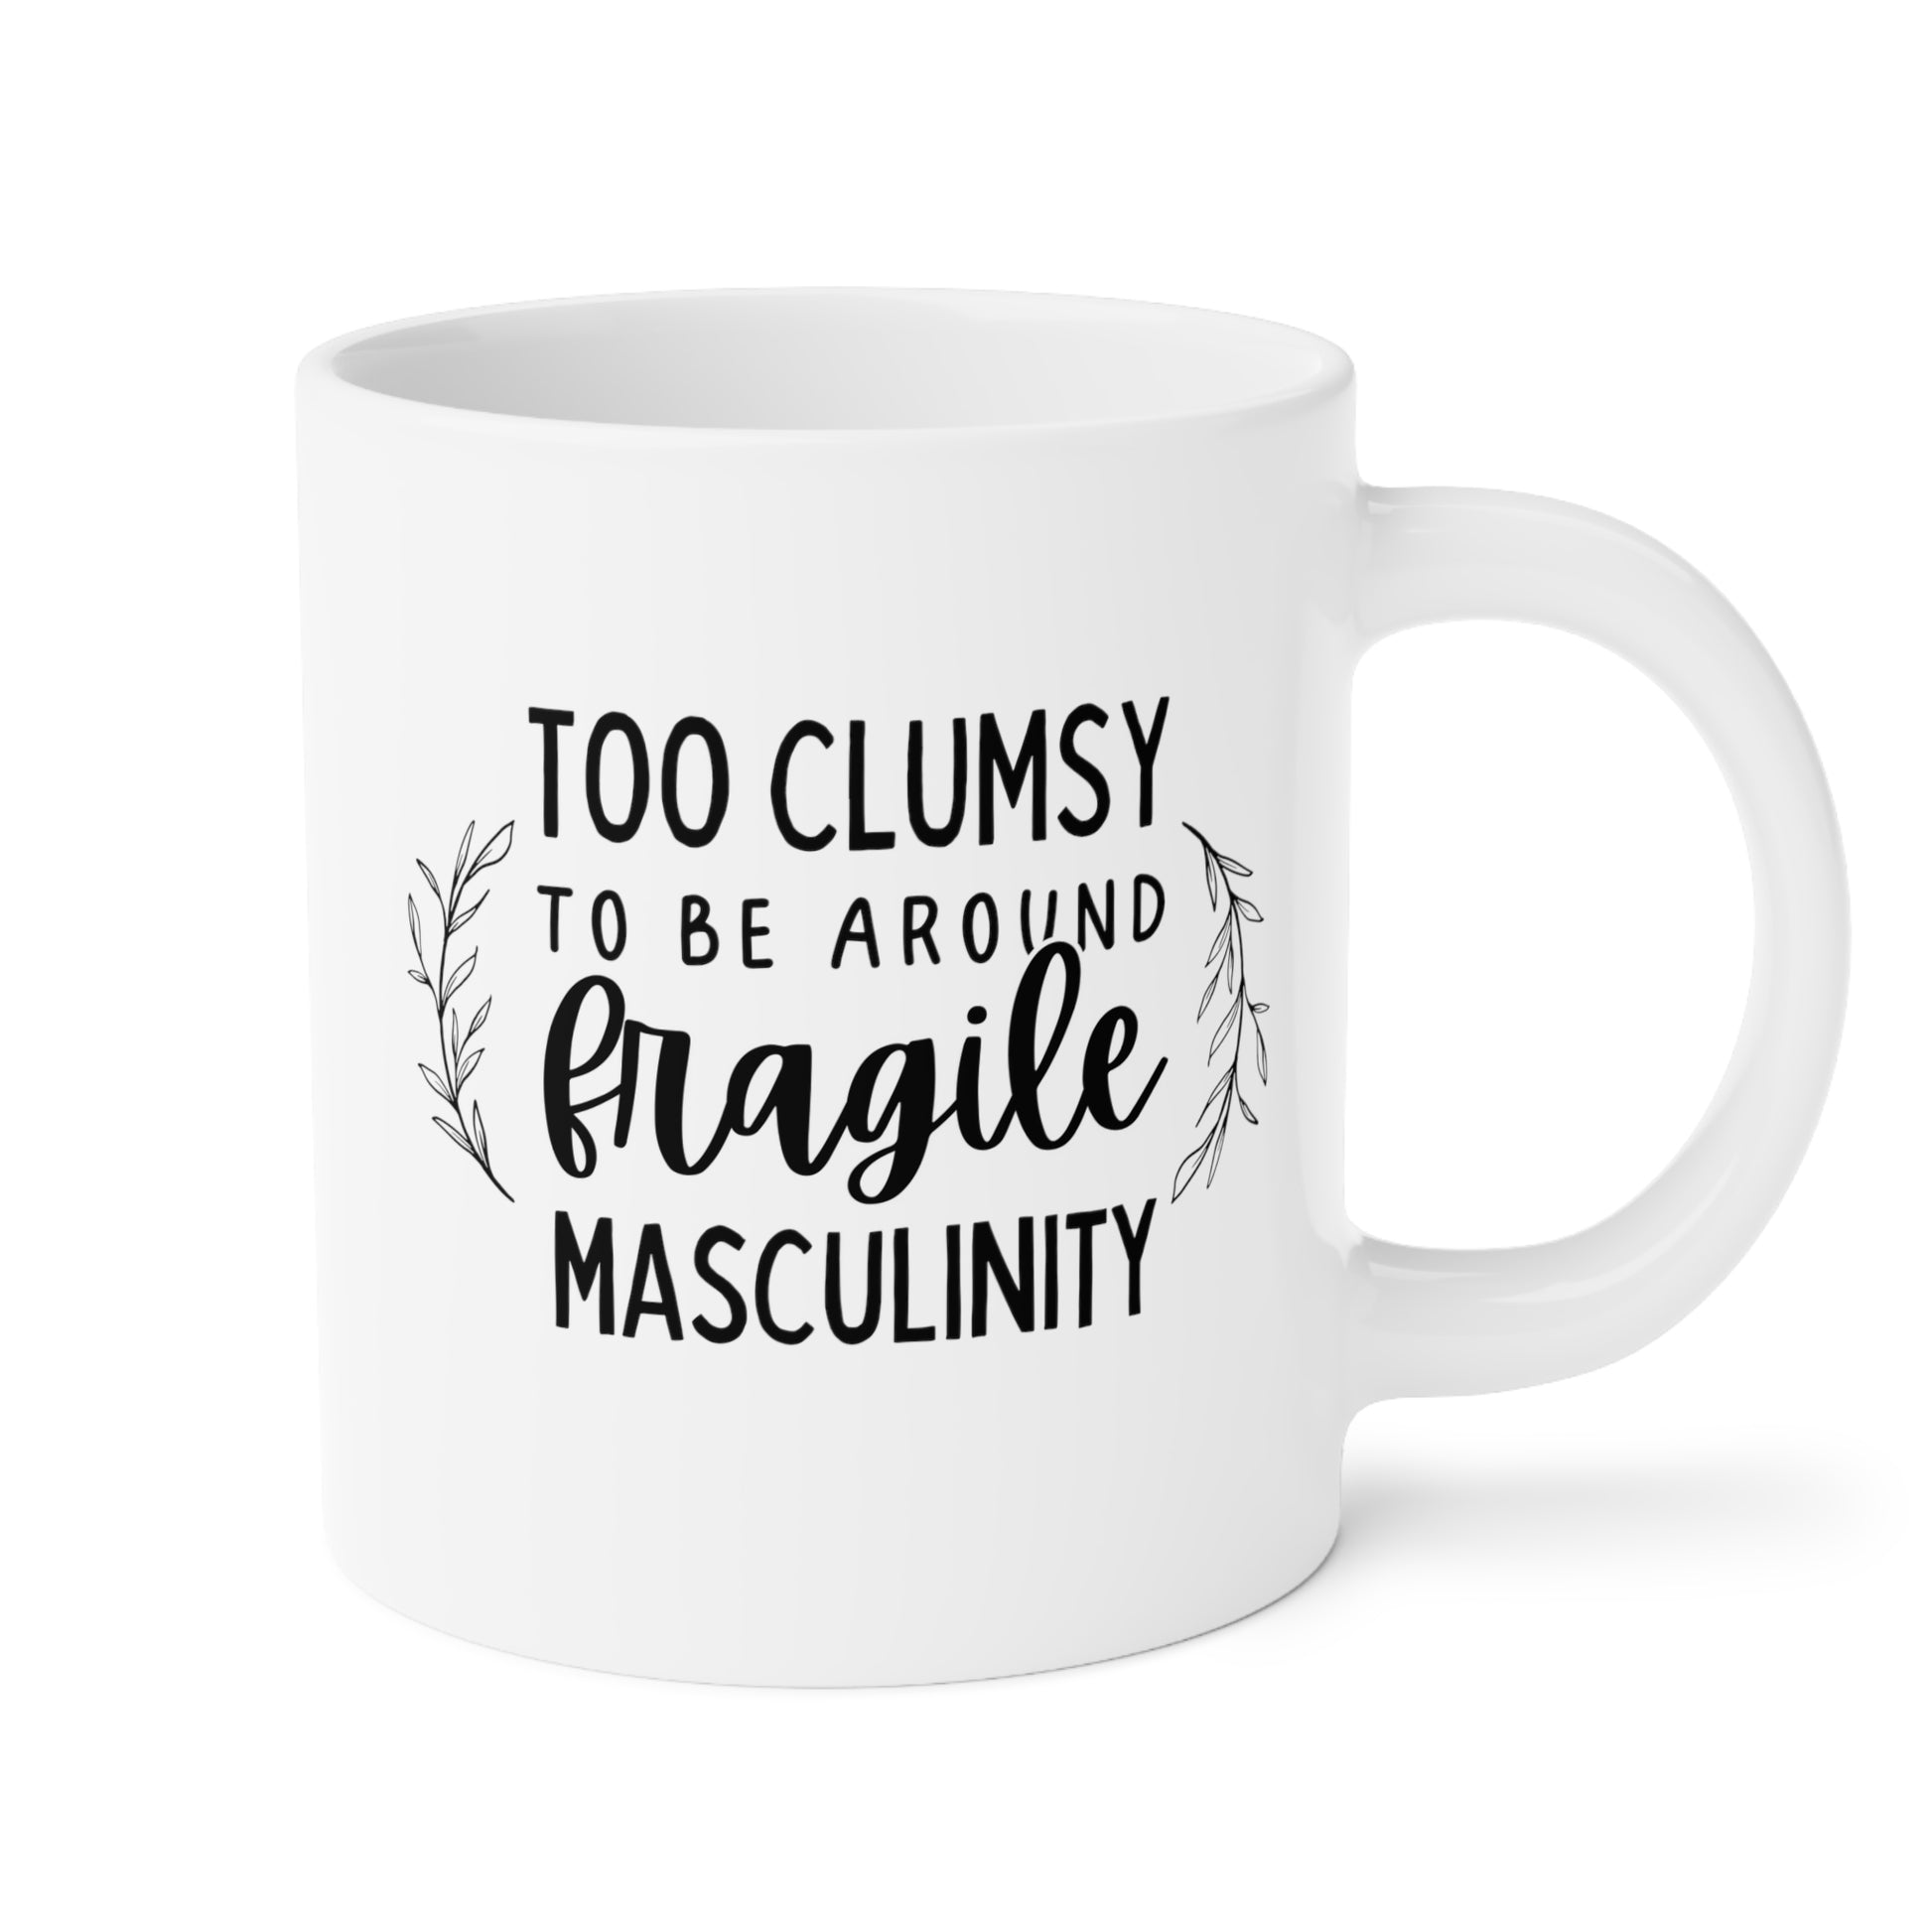 Too Clumsy to be Around Fragile Masculinity 20oz white funny large coffee mug gift for women feminist feminism waveywares wavey wares wavywares wavy wares